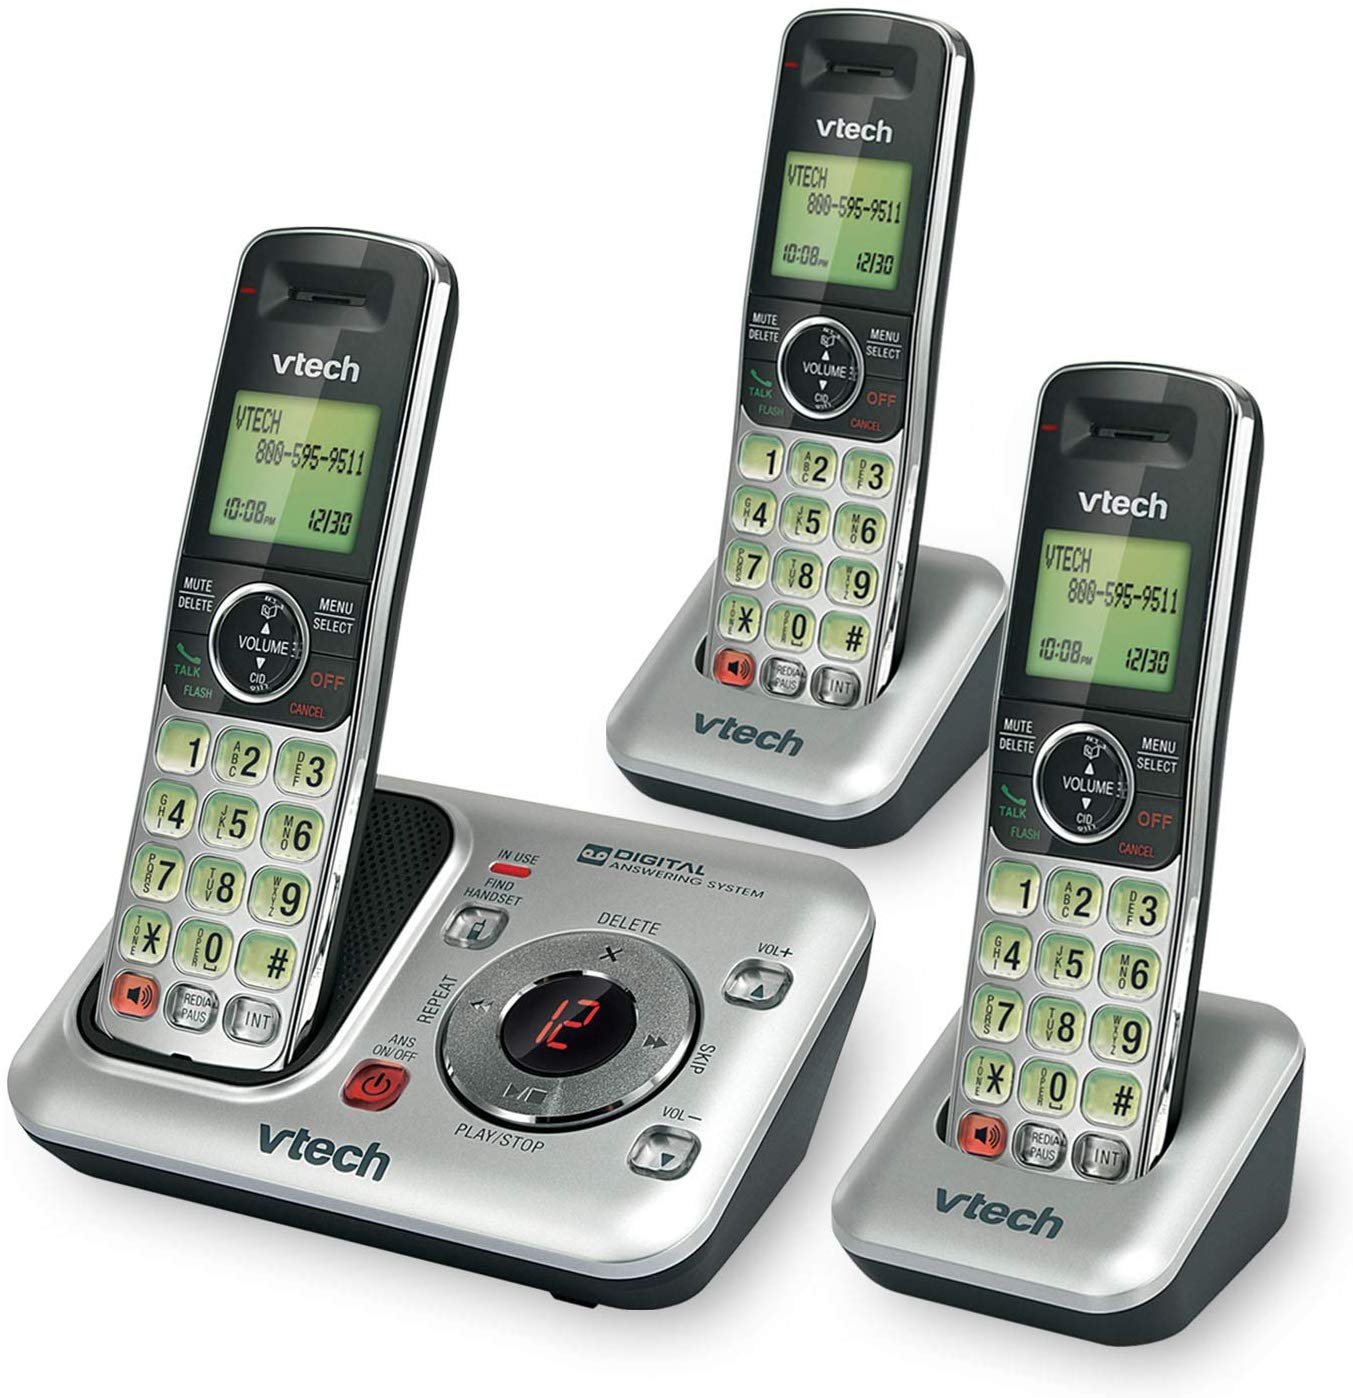 VTech 3-Handset DECT 6.0 Cordless Phone with Answering System and Caller ID, Expandable up to 5 Handsets, Wall-Mountable - image 1 of 3